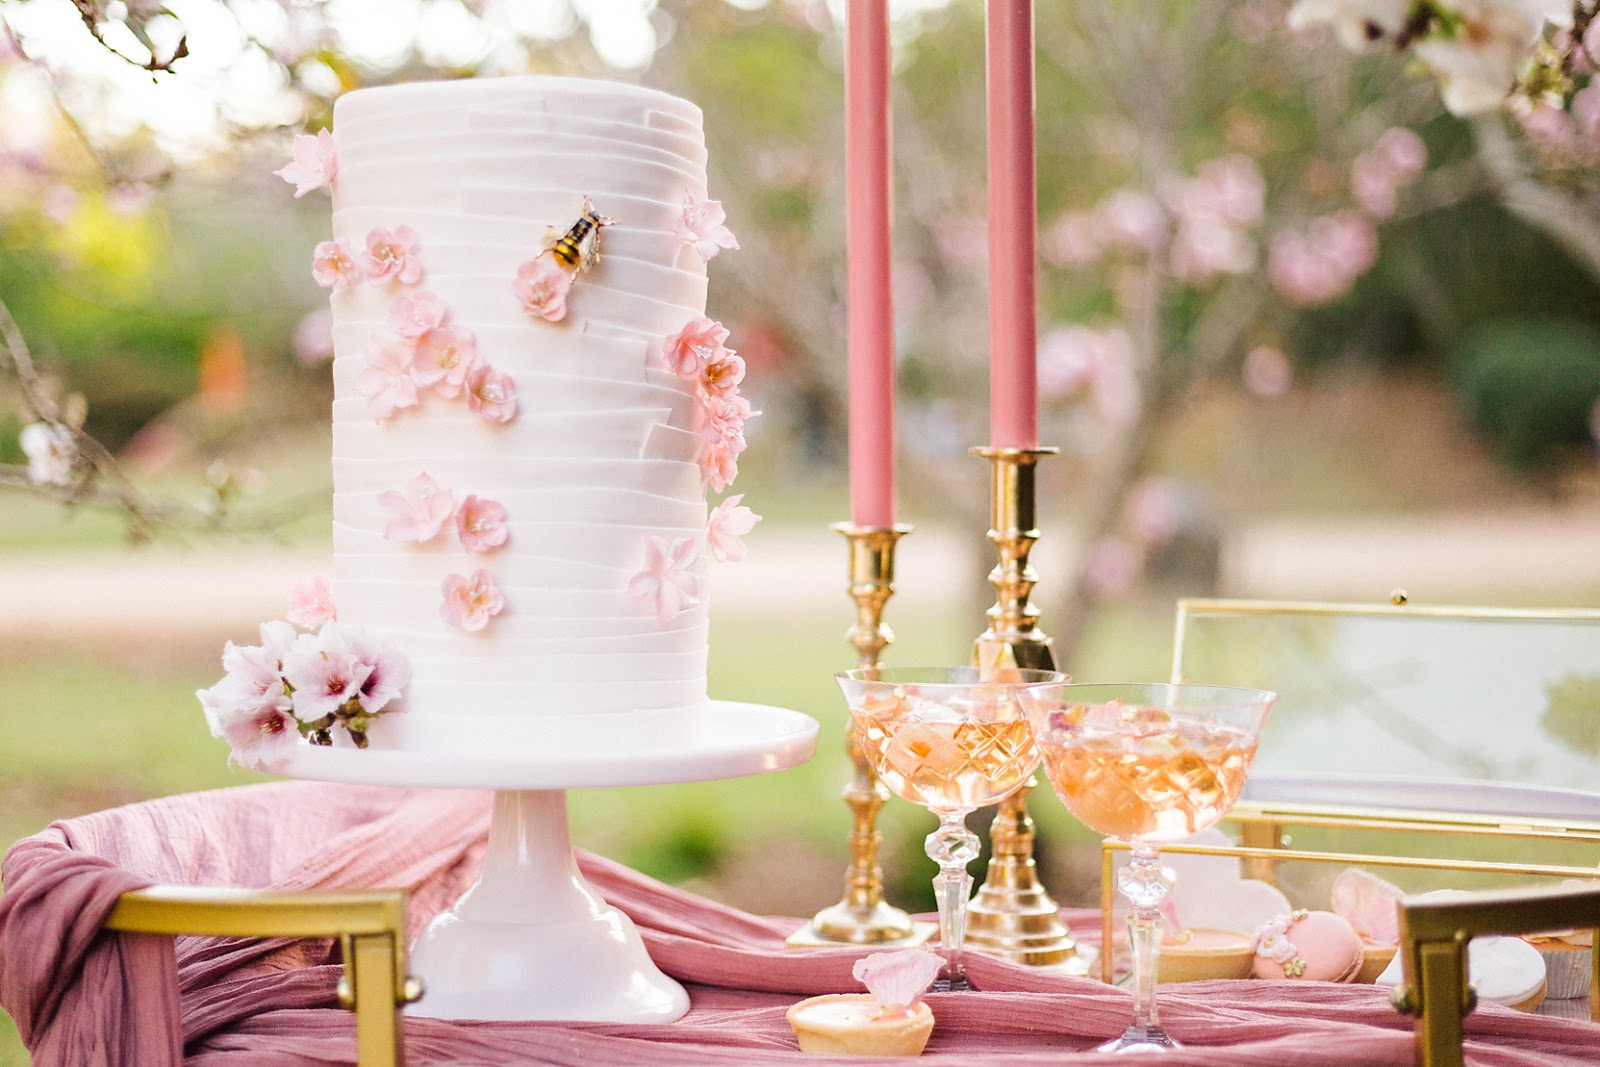 poppy and sage photography weddings cherry blossoms bride groom cake styling